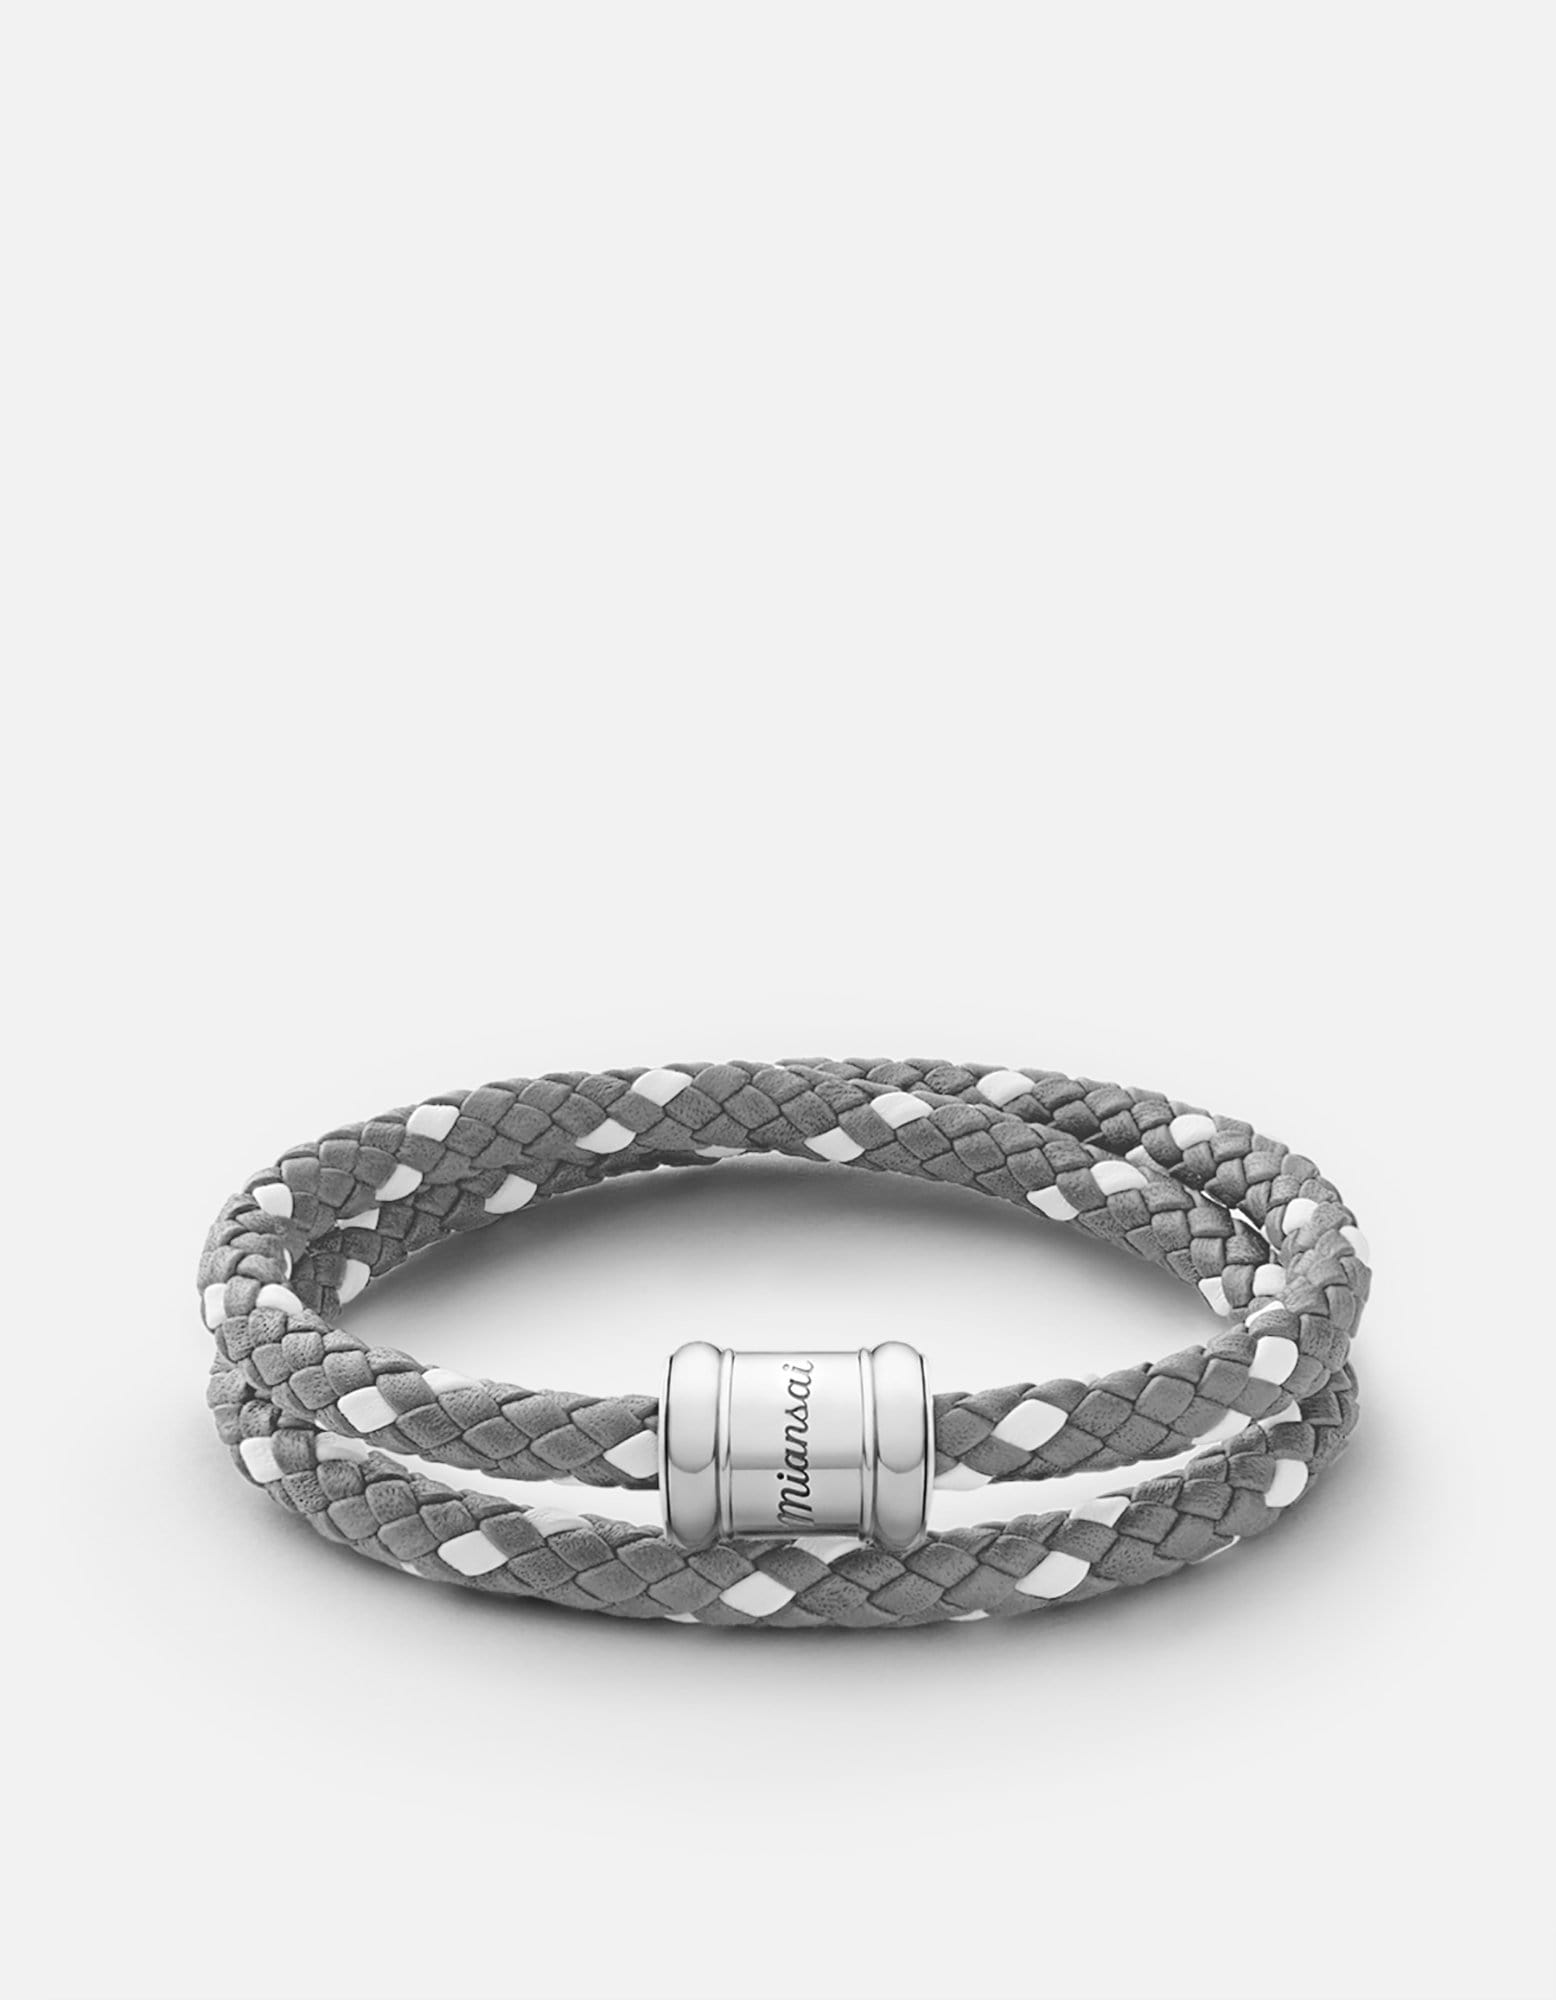 14K White Gold Solid Box Link Bracelet 8.5 Inches 6.1mm 67830: buy online  in NYC. Best price at TRAXNYC.